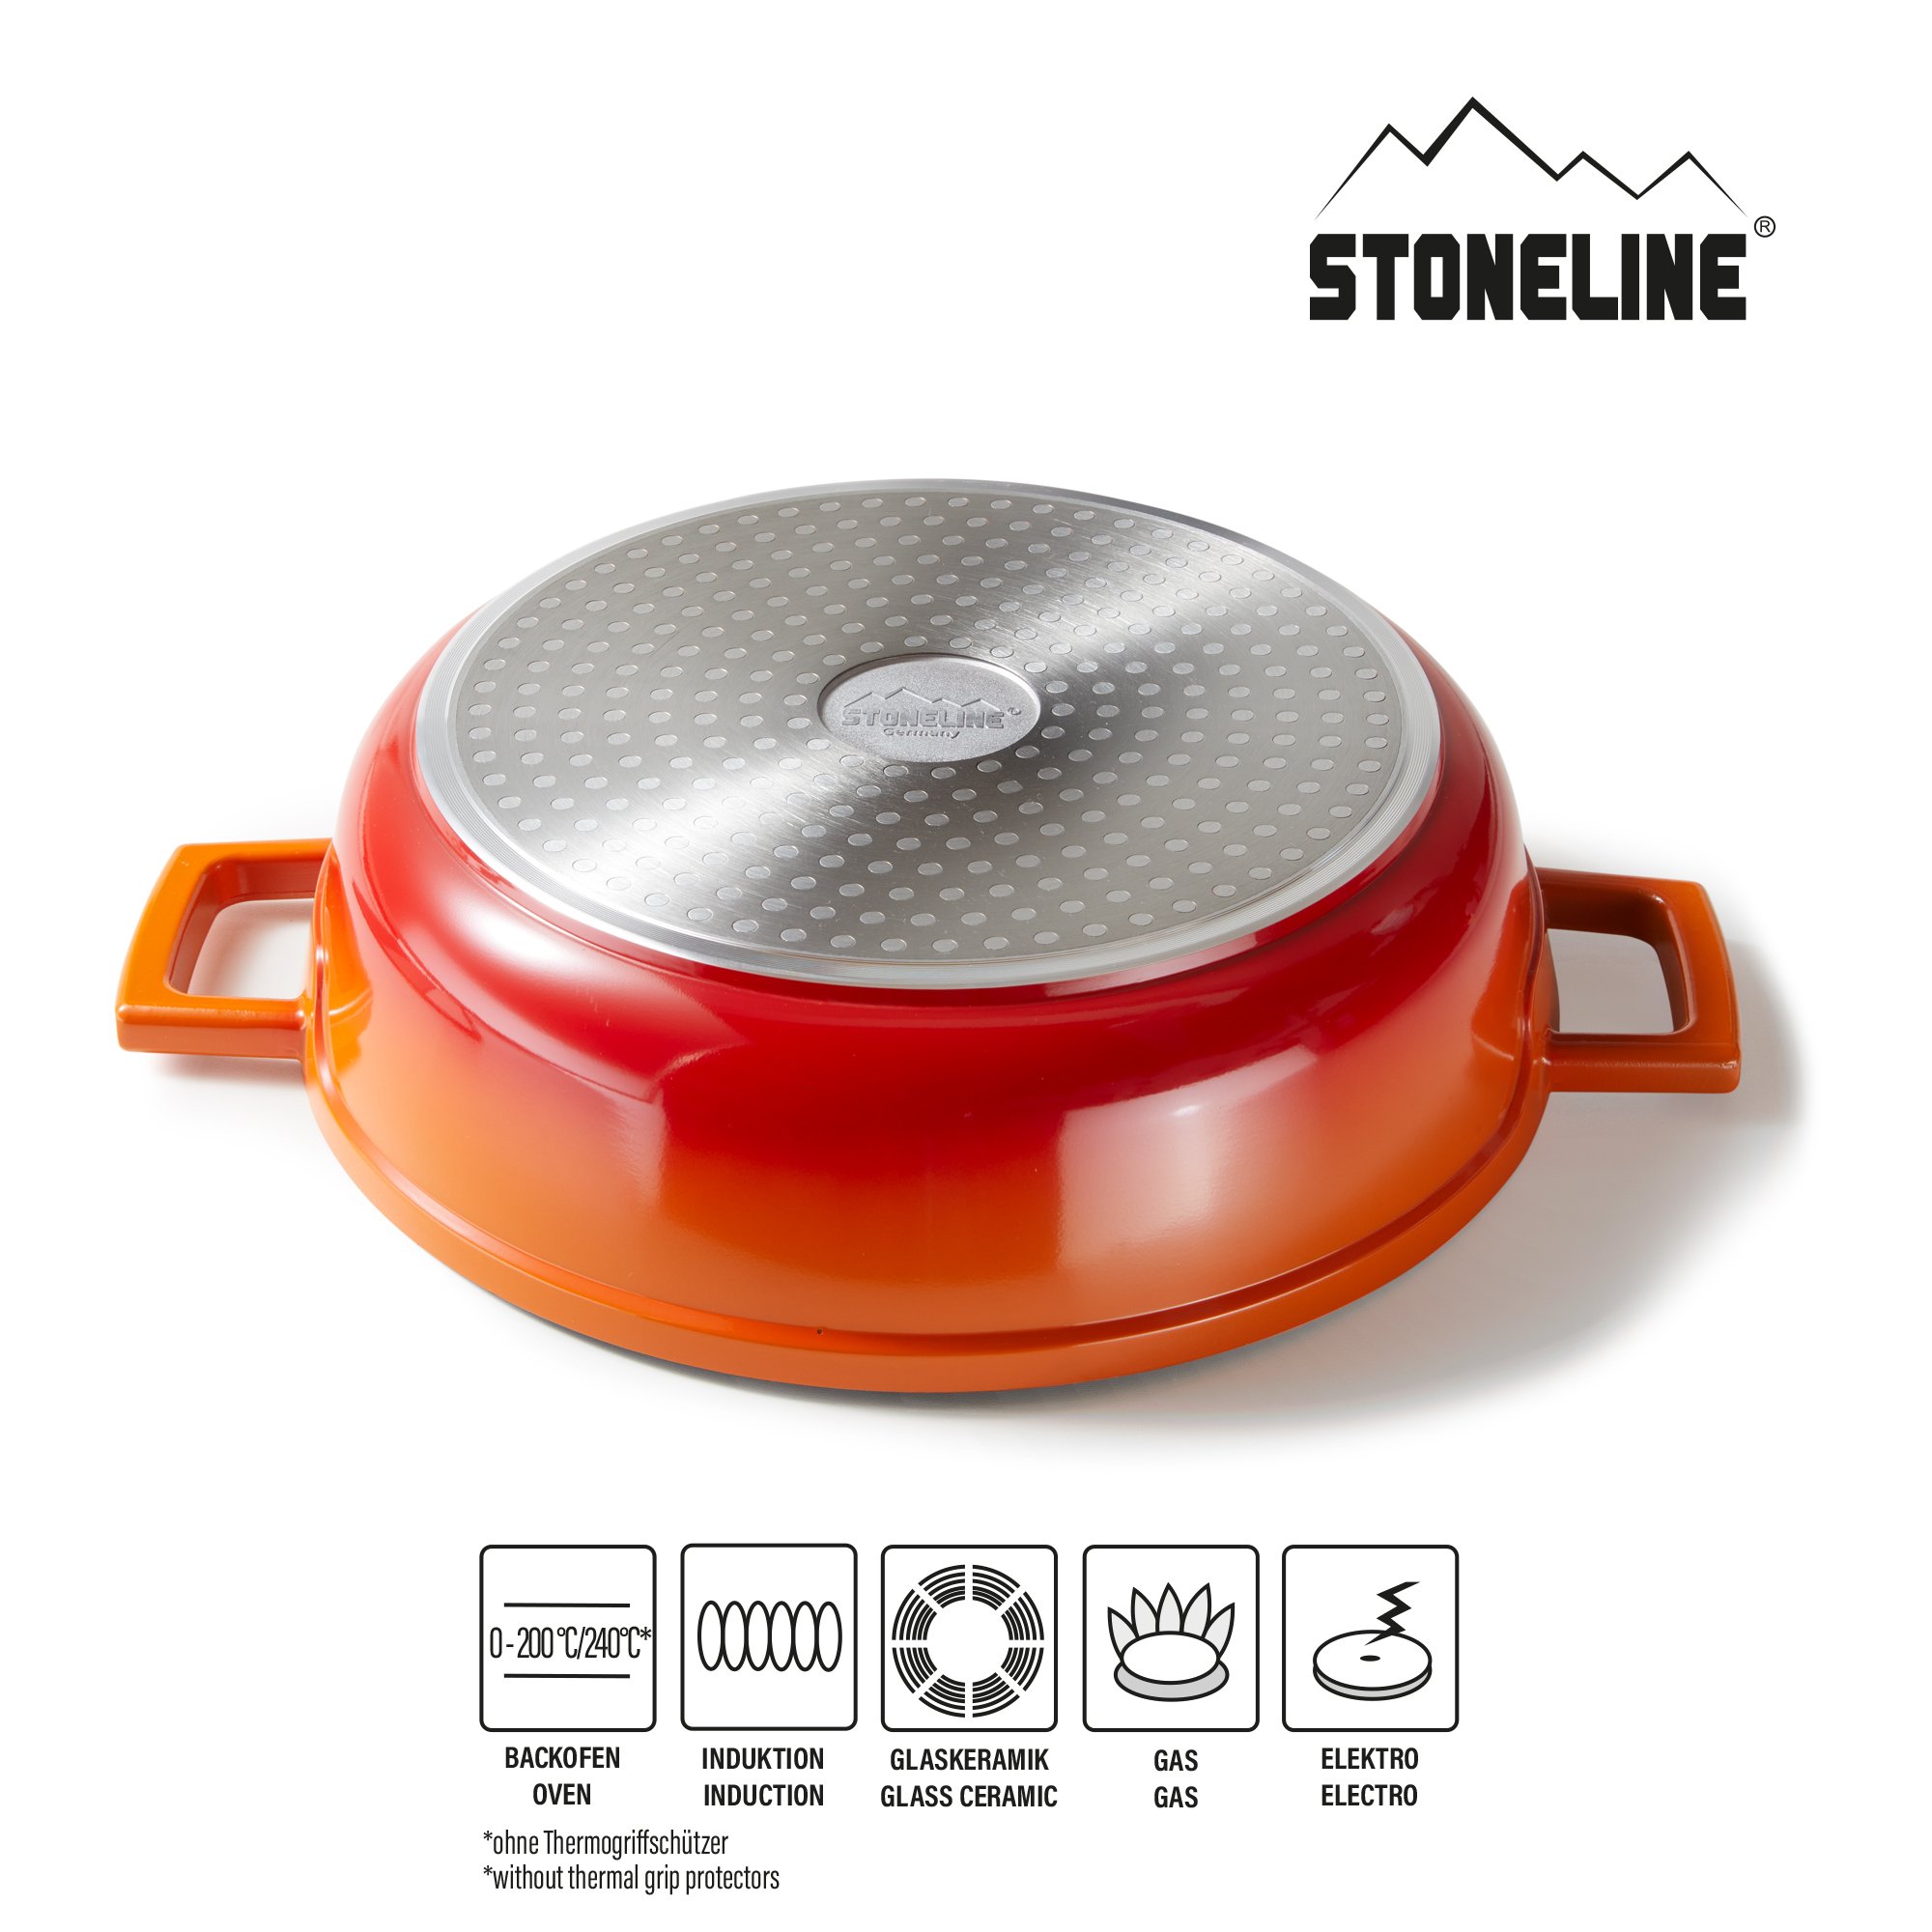 STONELINE® Gourmet roaster 28 cm with lid, oven and induction suitable, non-stick coating, oven red